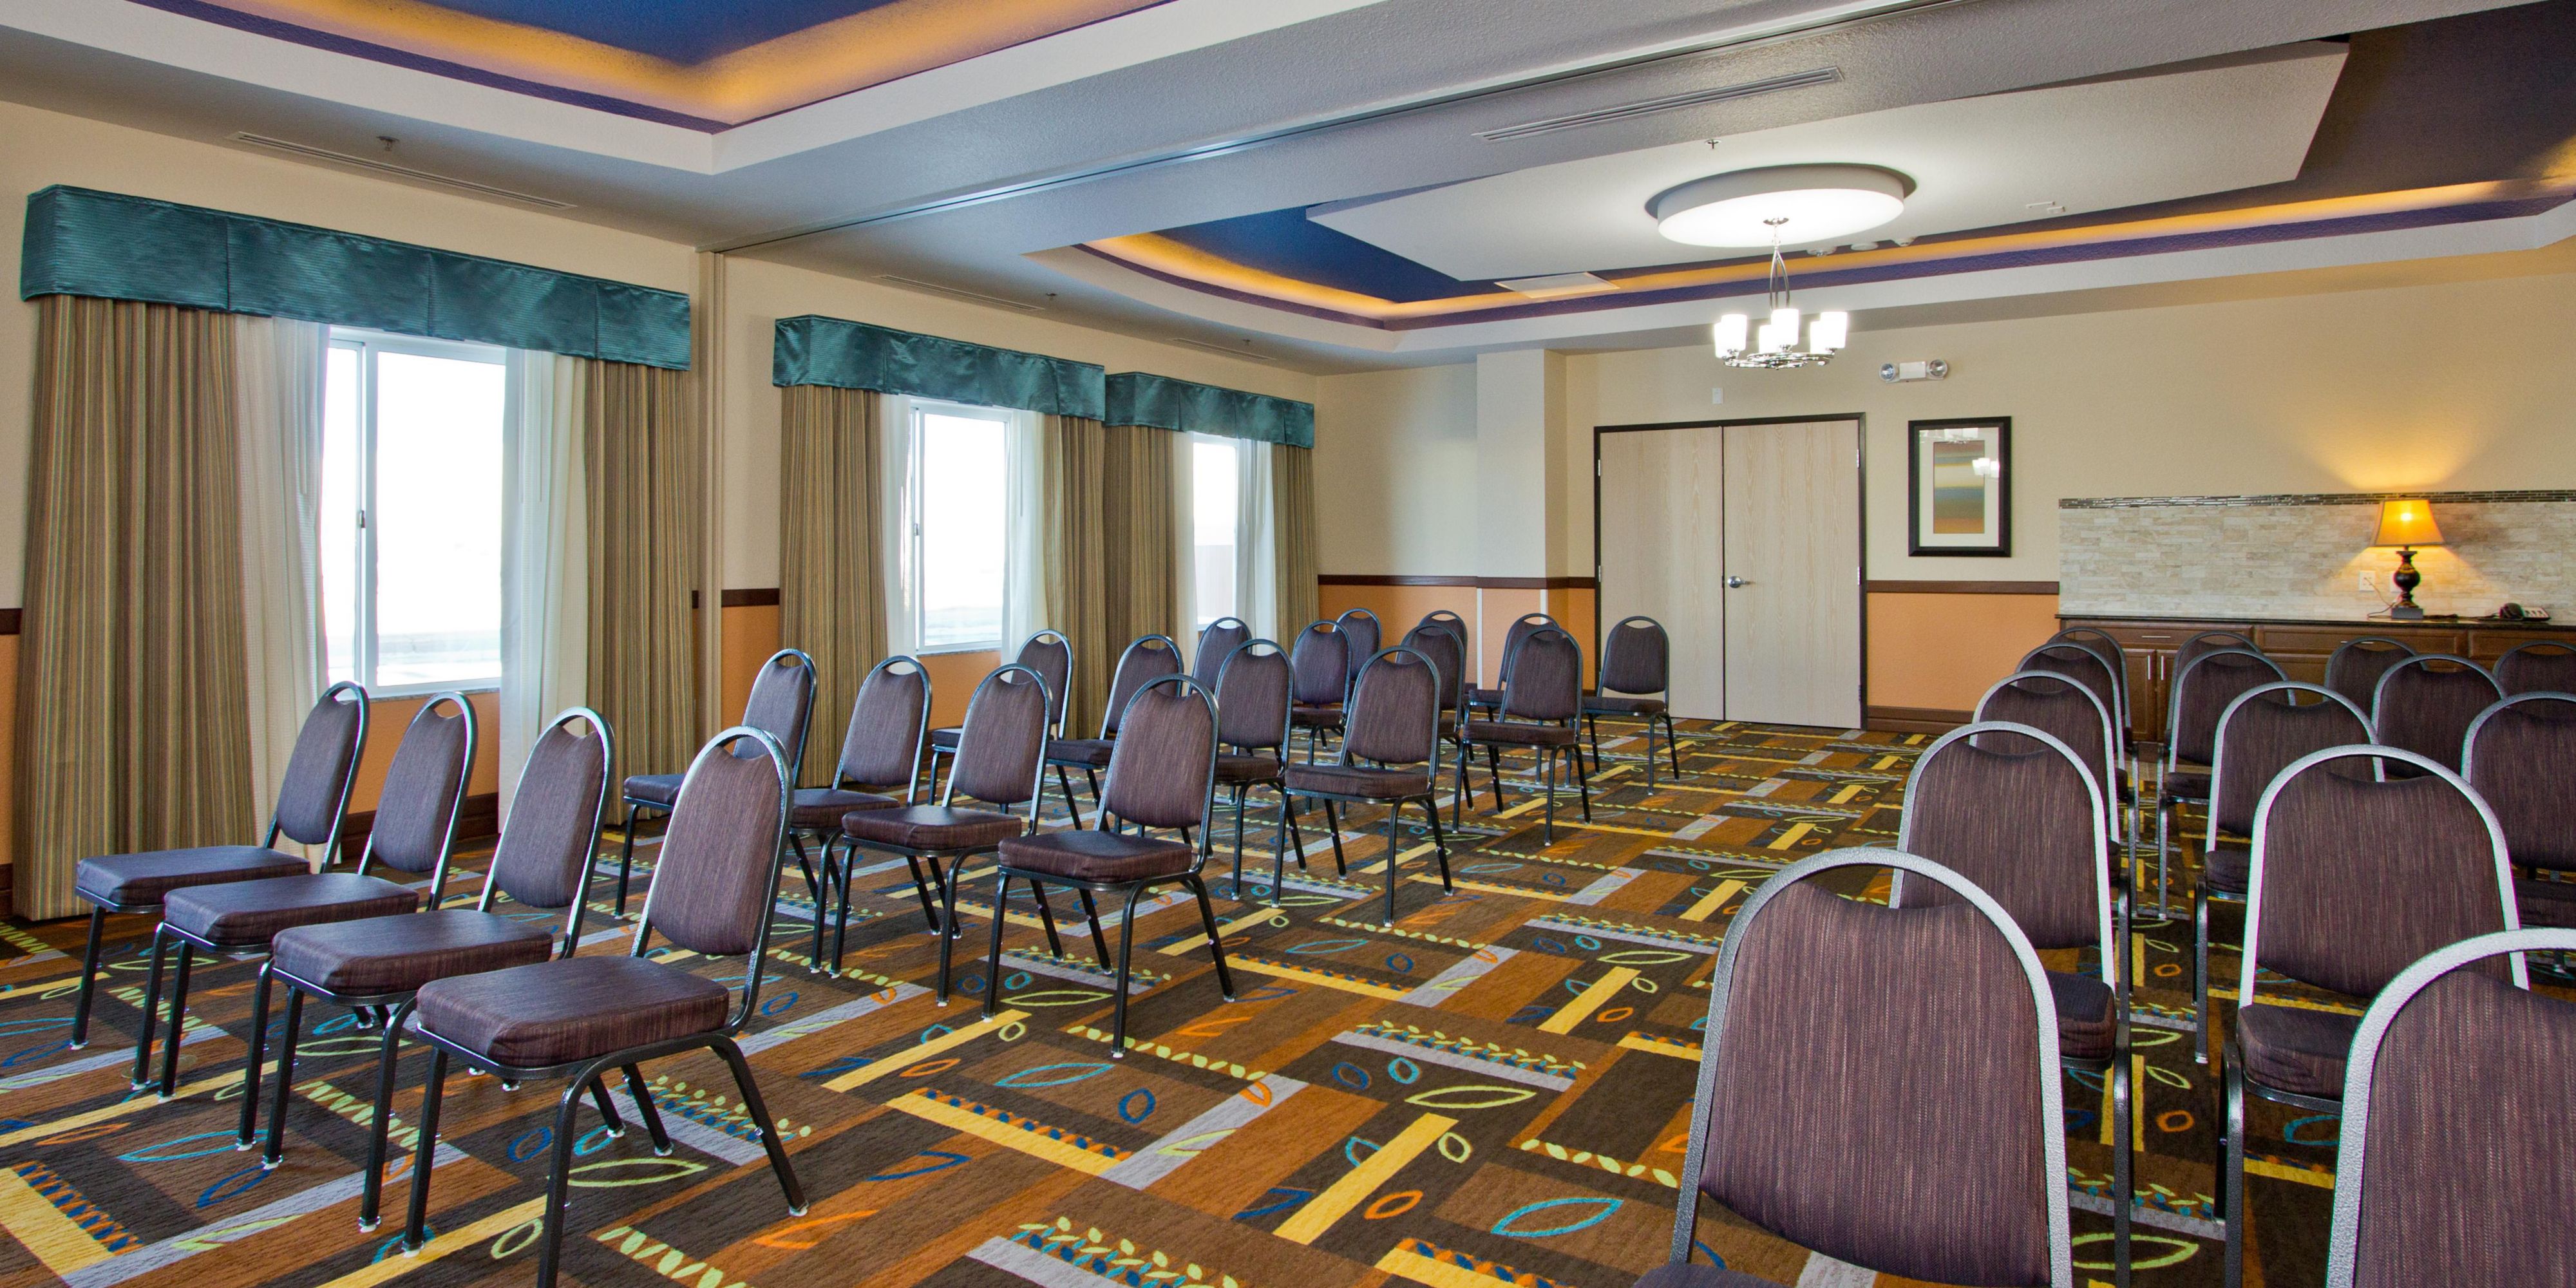 Are you looking to host a family reunion, a baby shower, a 50th wedding anniversary celebration, or maybe just to host a training class of sorts?  We've got you covered with our 1288 square foot meeting room! Depending on your set-up requirements, we have hosted as many as 100 people!.  Contact Ashley Prado at (303) 371-9498 for more information.